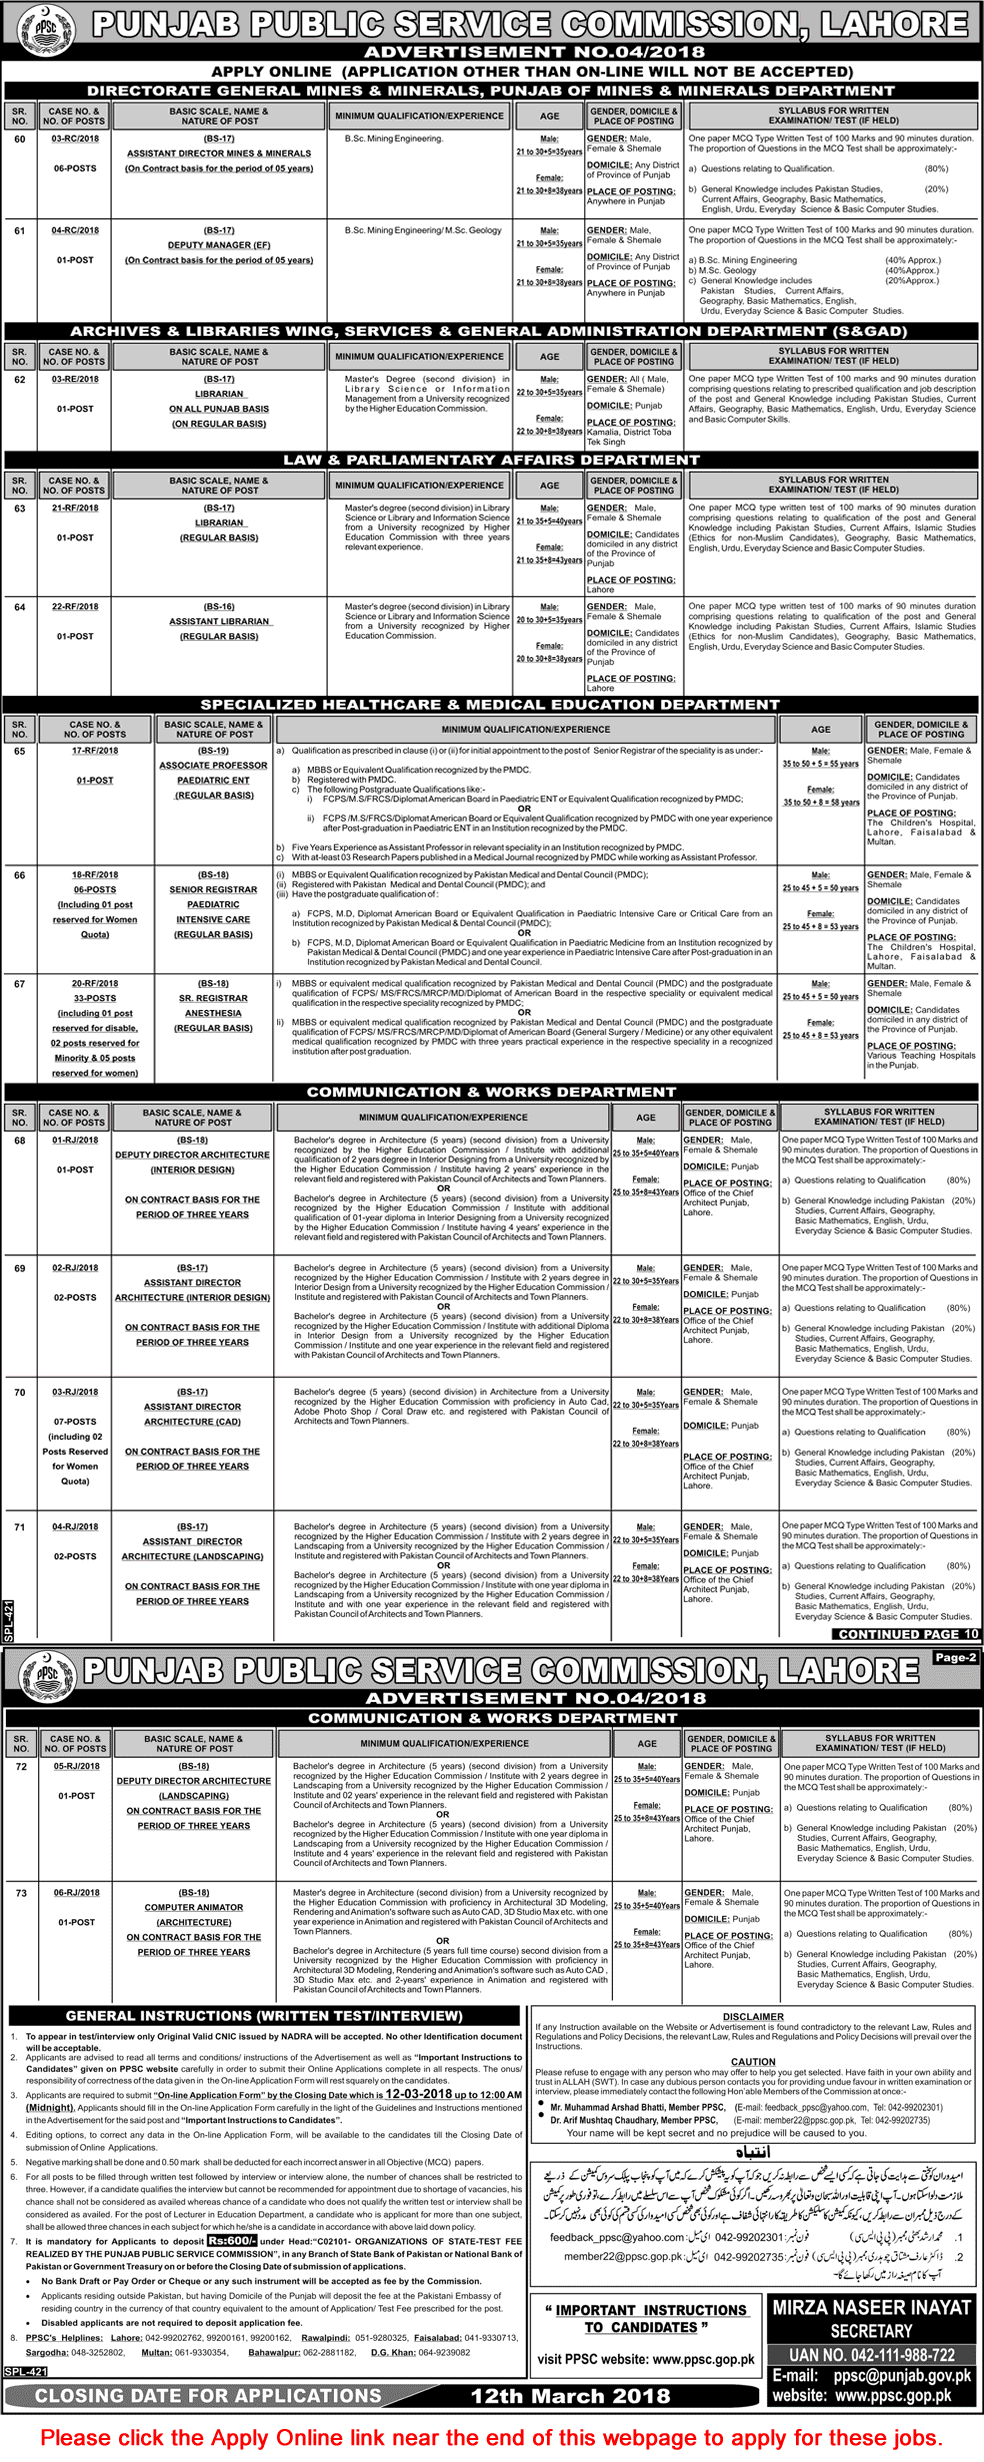 PPSC Jobs February 2018 Apply Online Consolidated Advertisement No 04/2018 4/2018 Latest